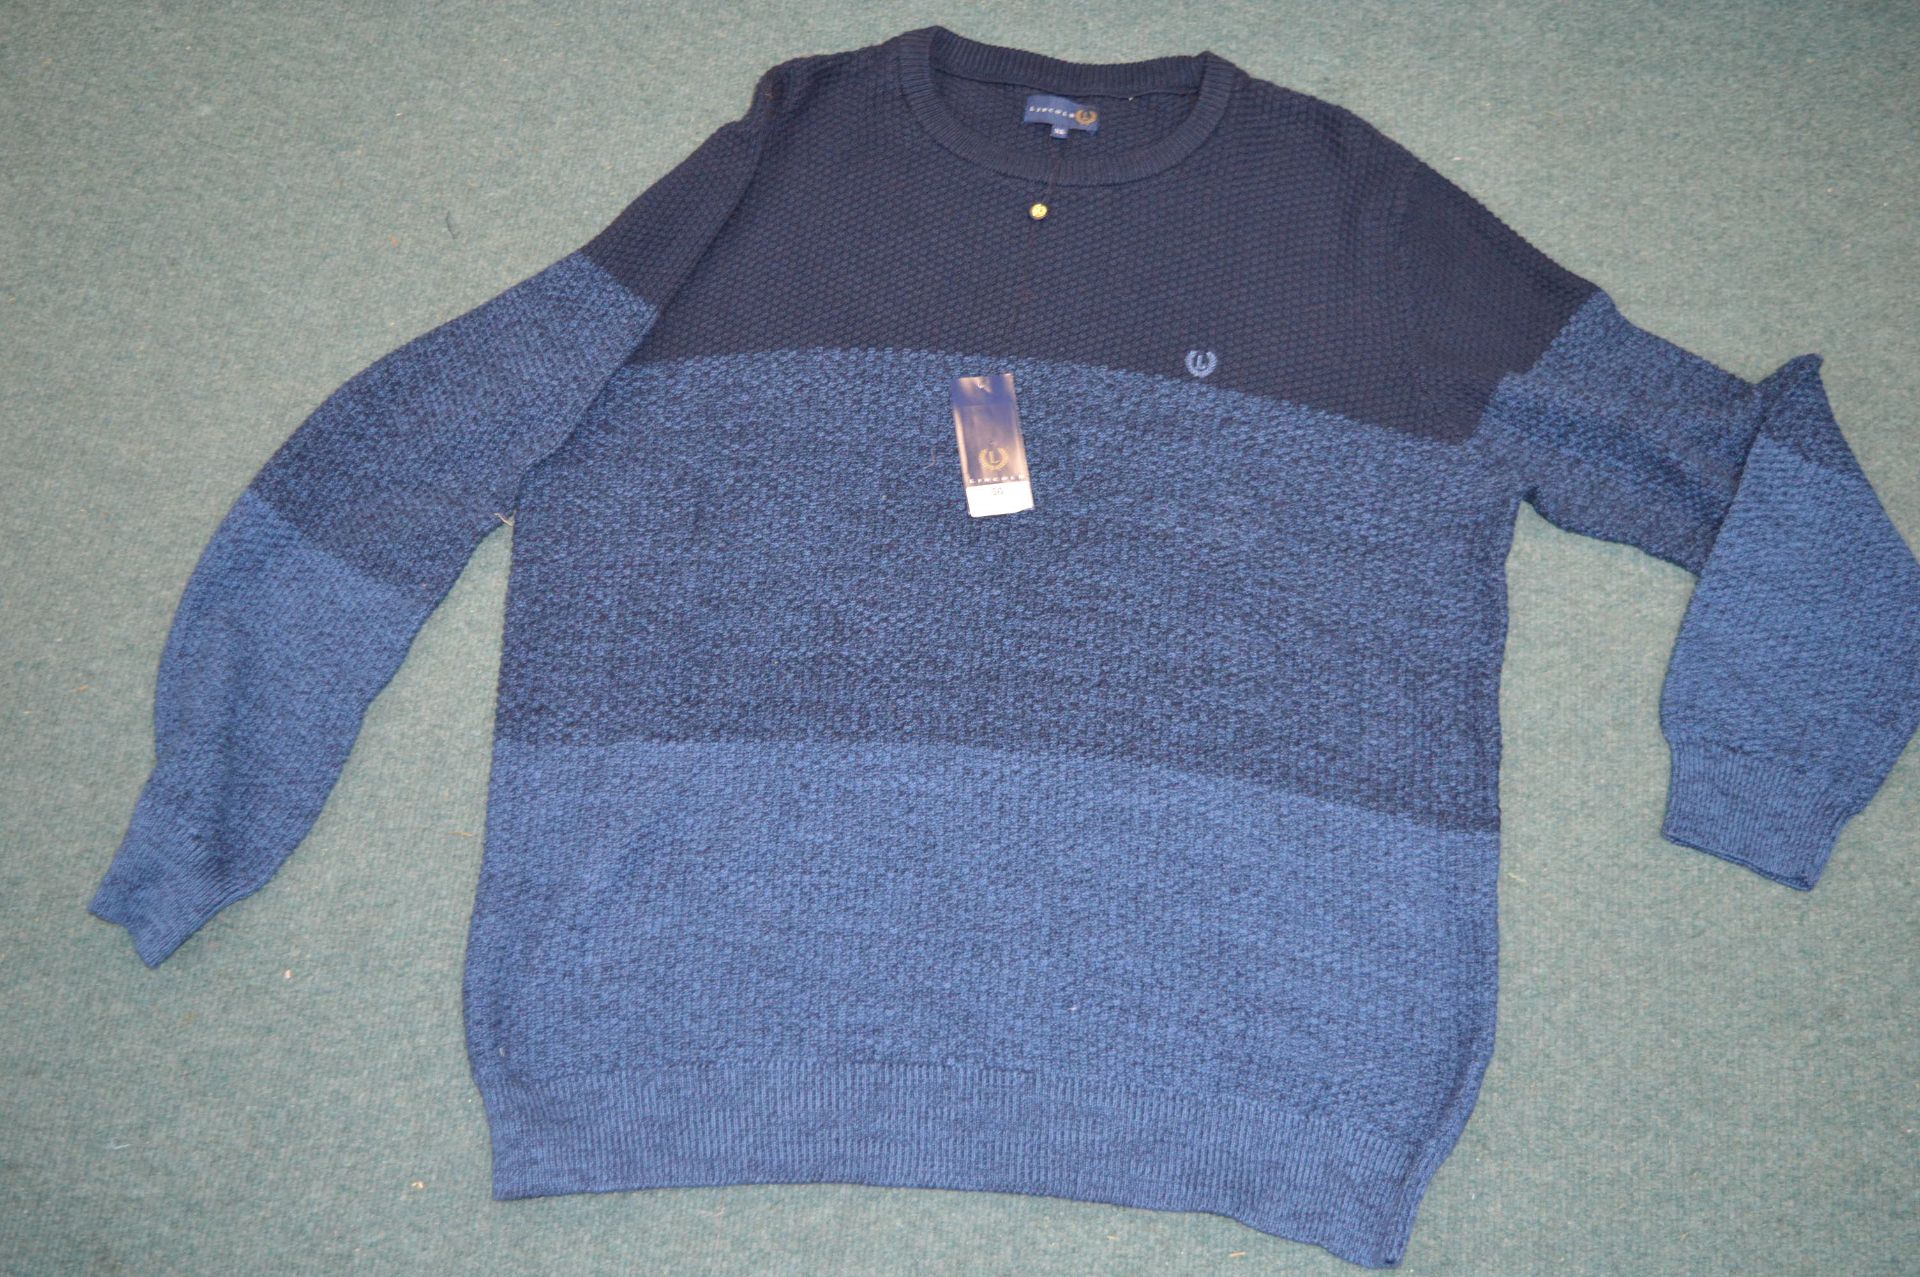 Lincoln Gent's Jumper Size: XL